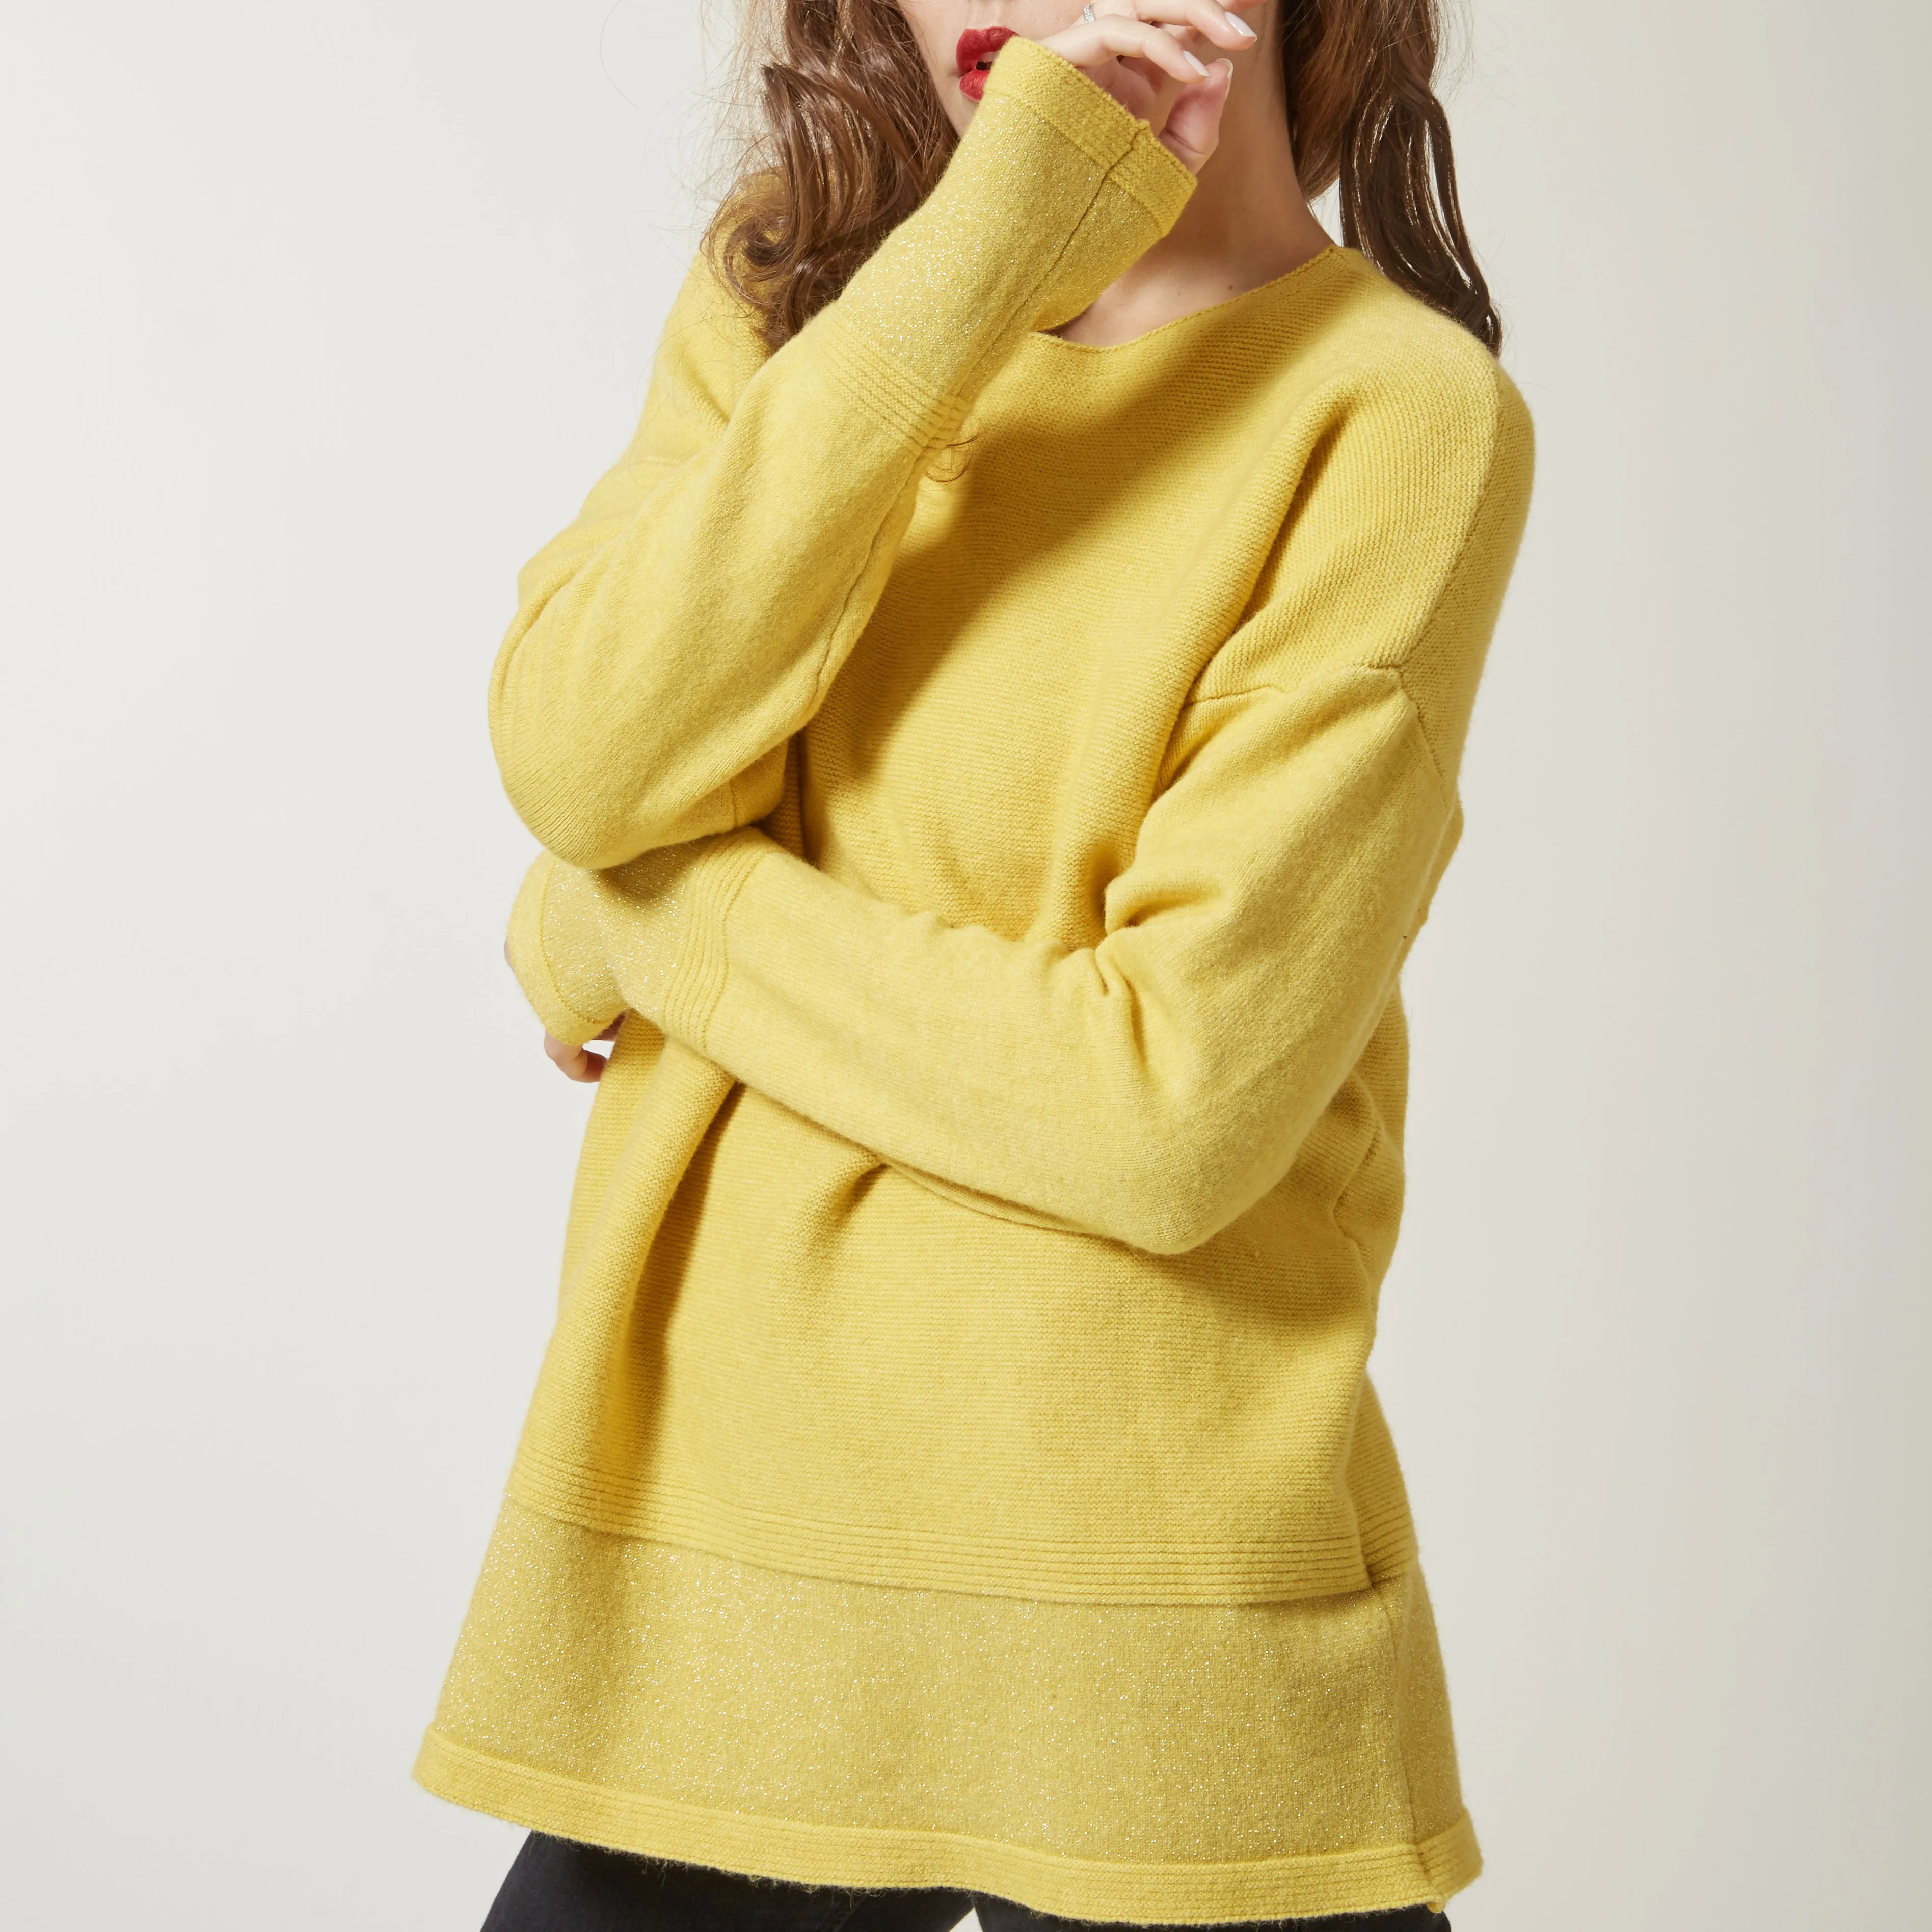 Striped Round Neck Solid Yellow Jumpers Woman Custom Knitted Turtleneck Jumper Sweater